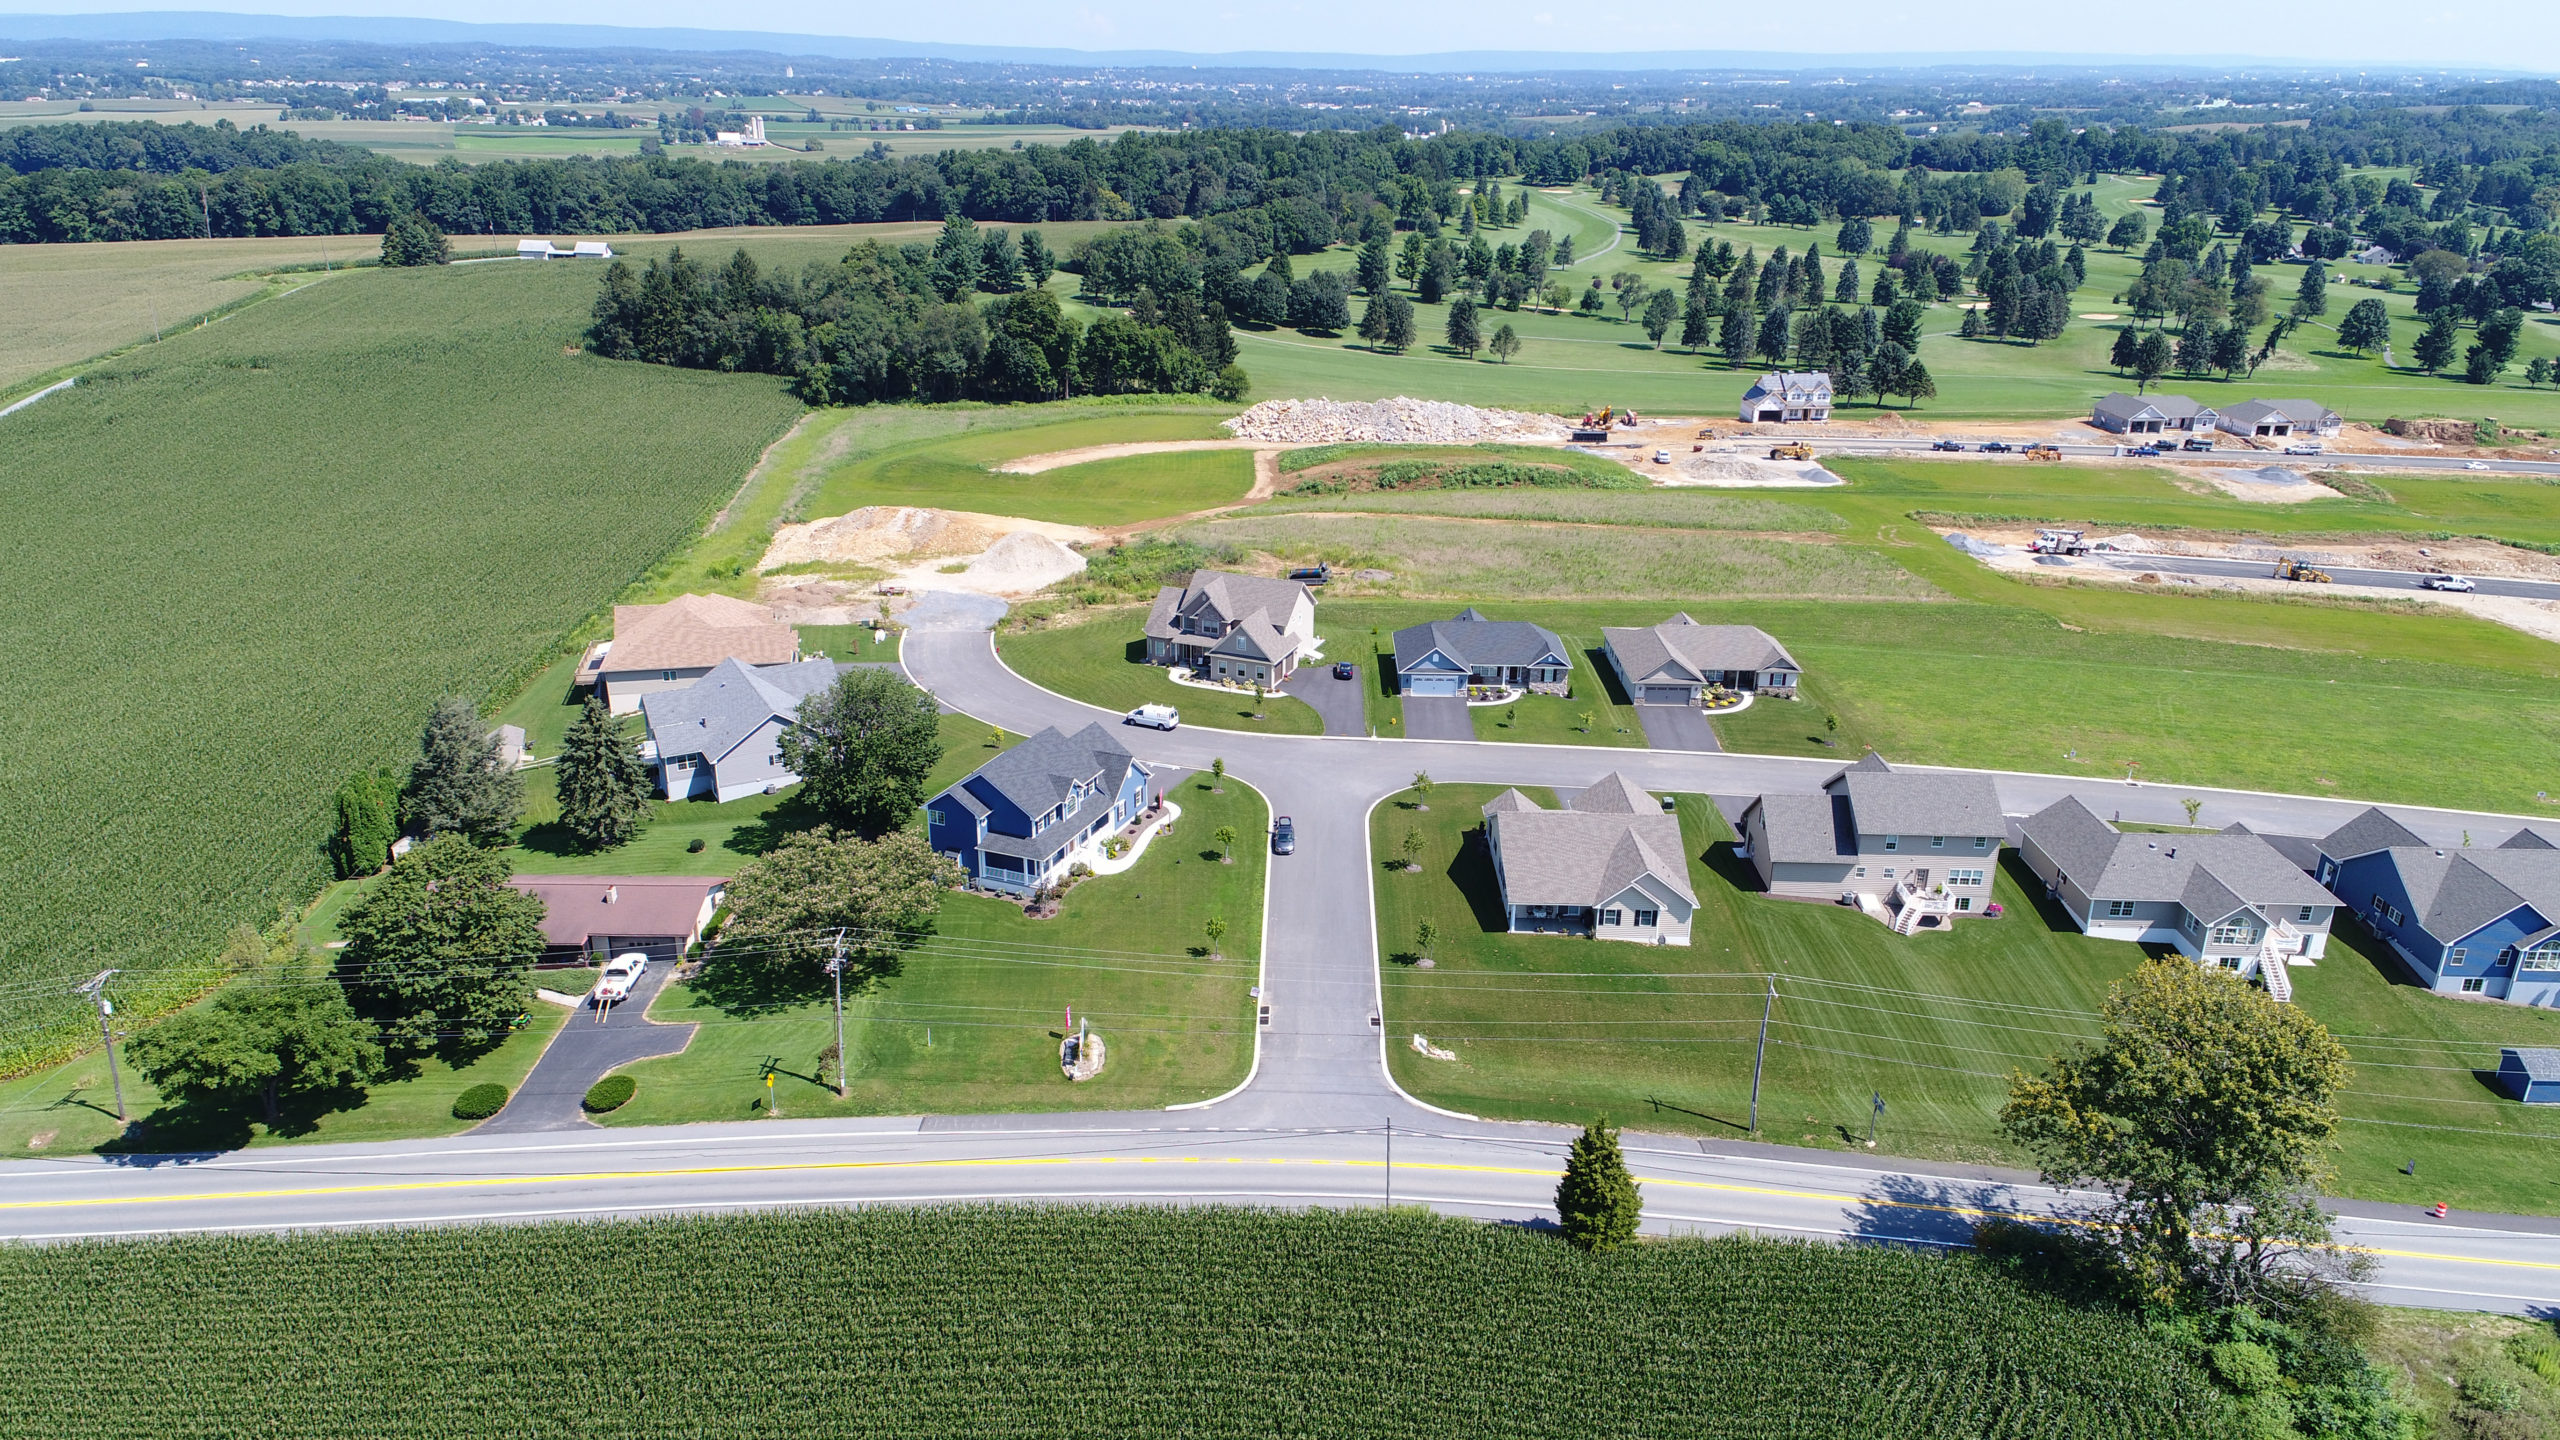 Aerial photo of Scenic Ridge at Cornwall showing roads, houses, surrounding fields and trees